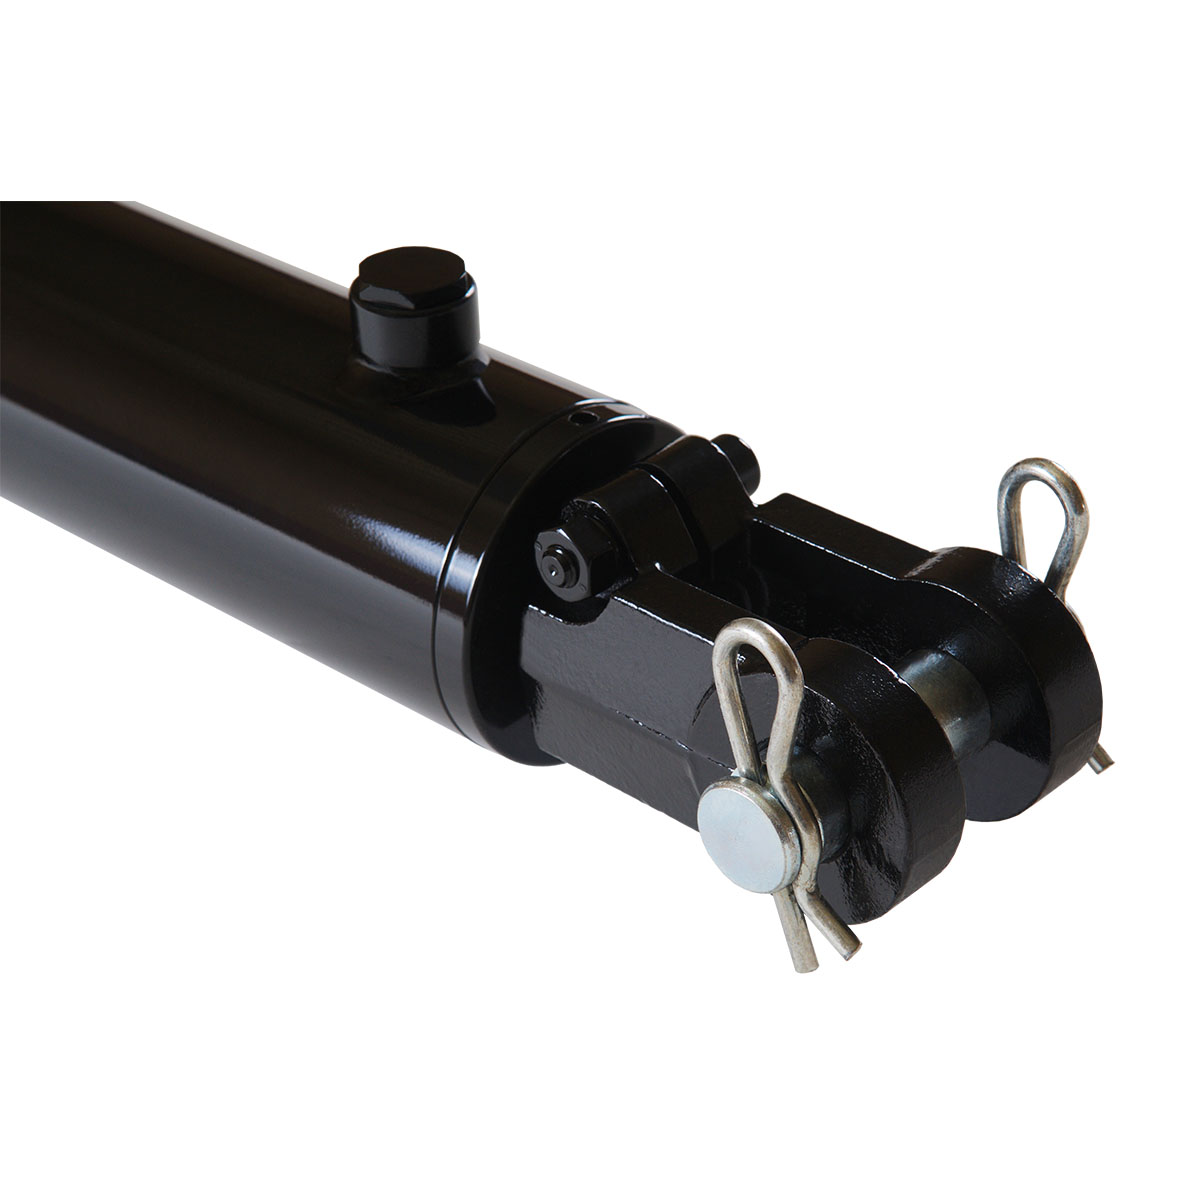 3 bore x 30 stroke hydraulic cylinder, welded clevis double acting cylinder | Magister Hydraulics